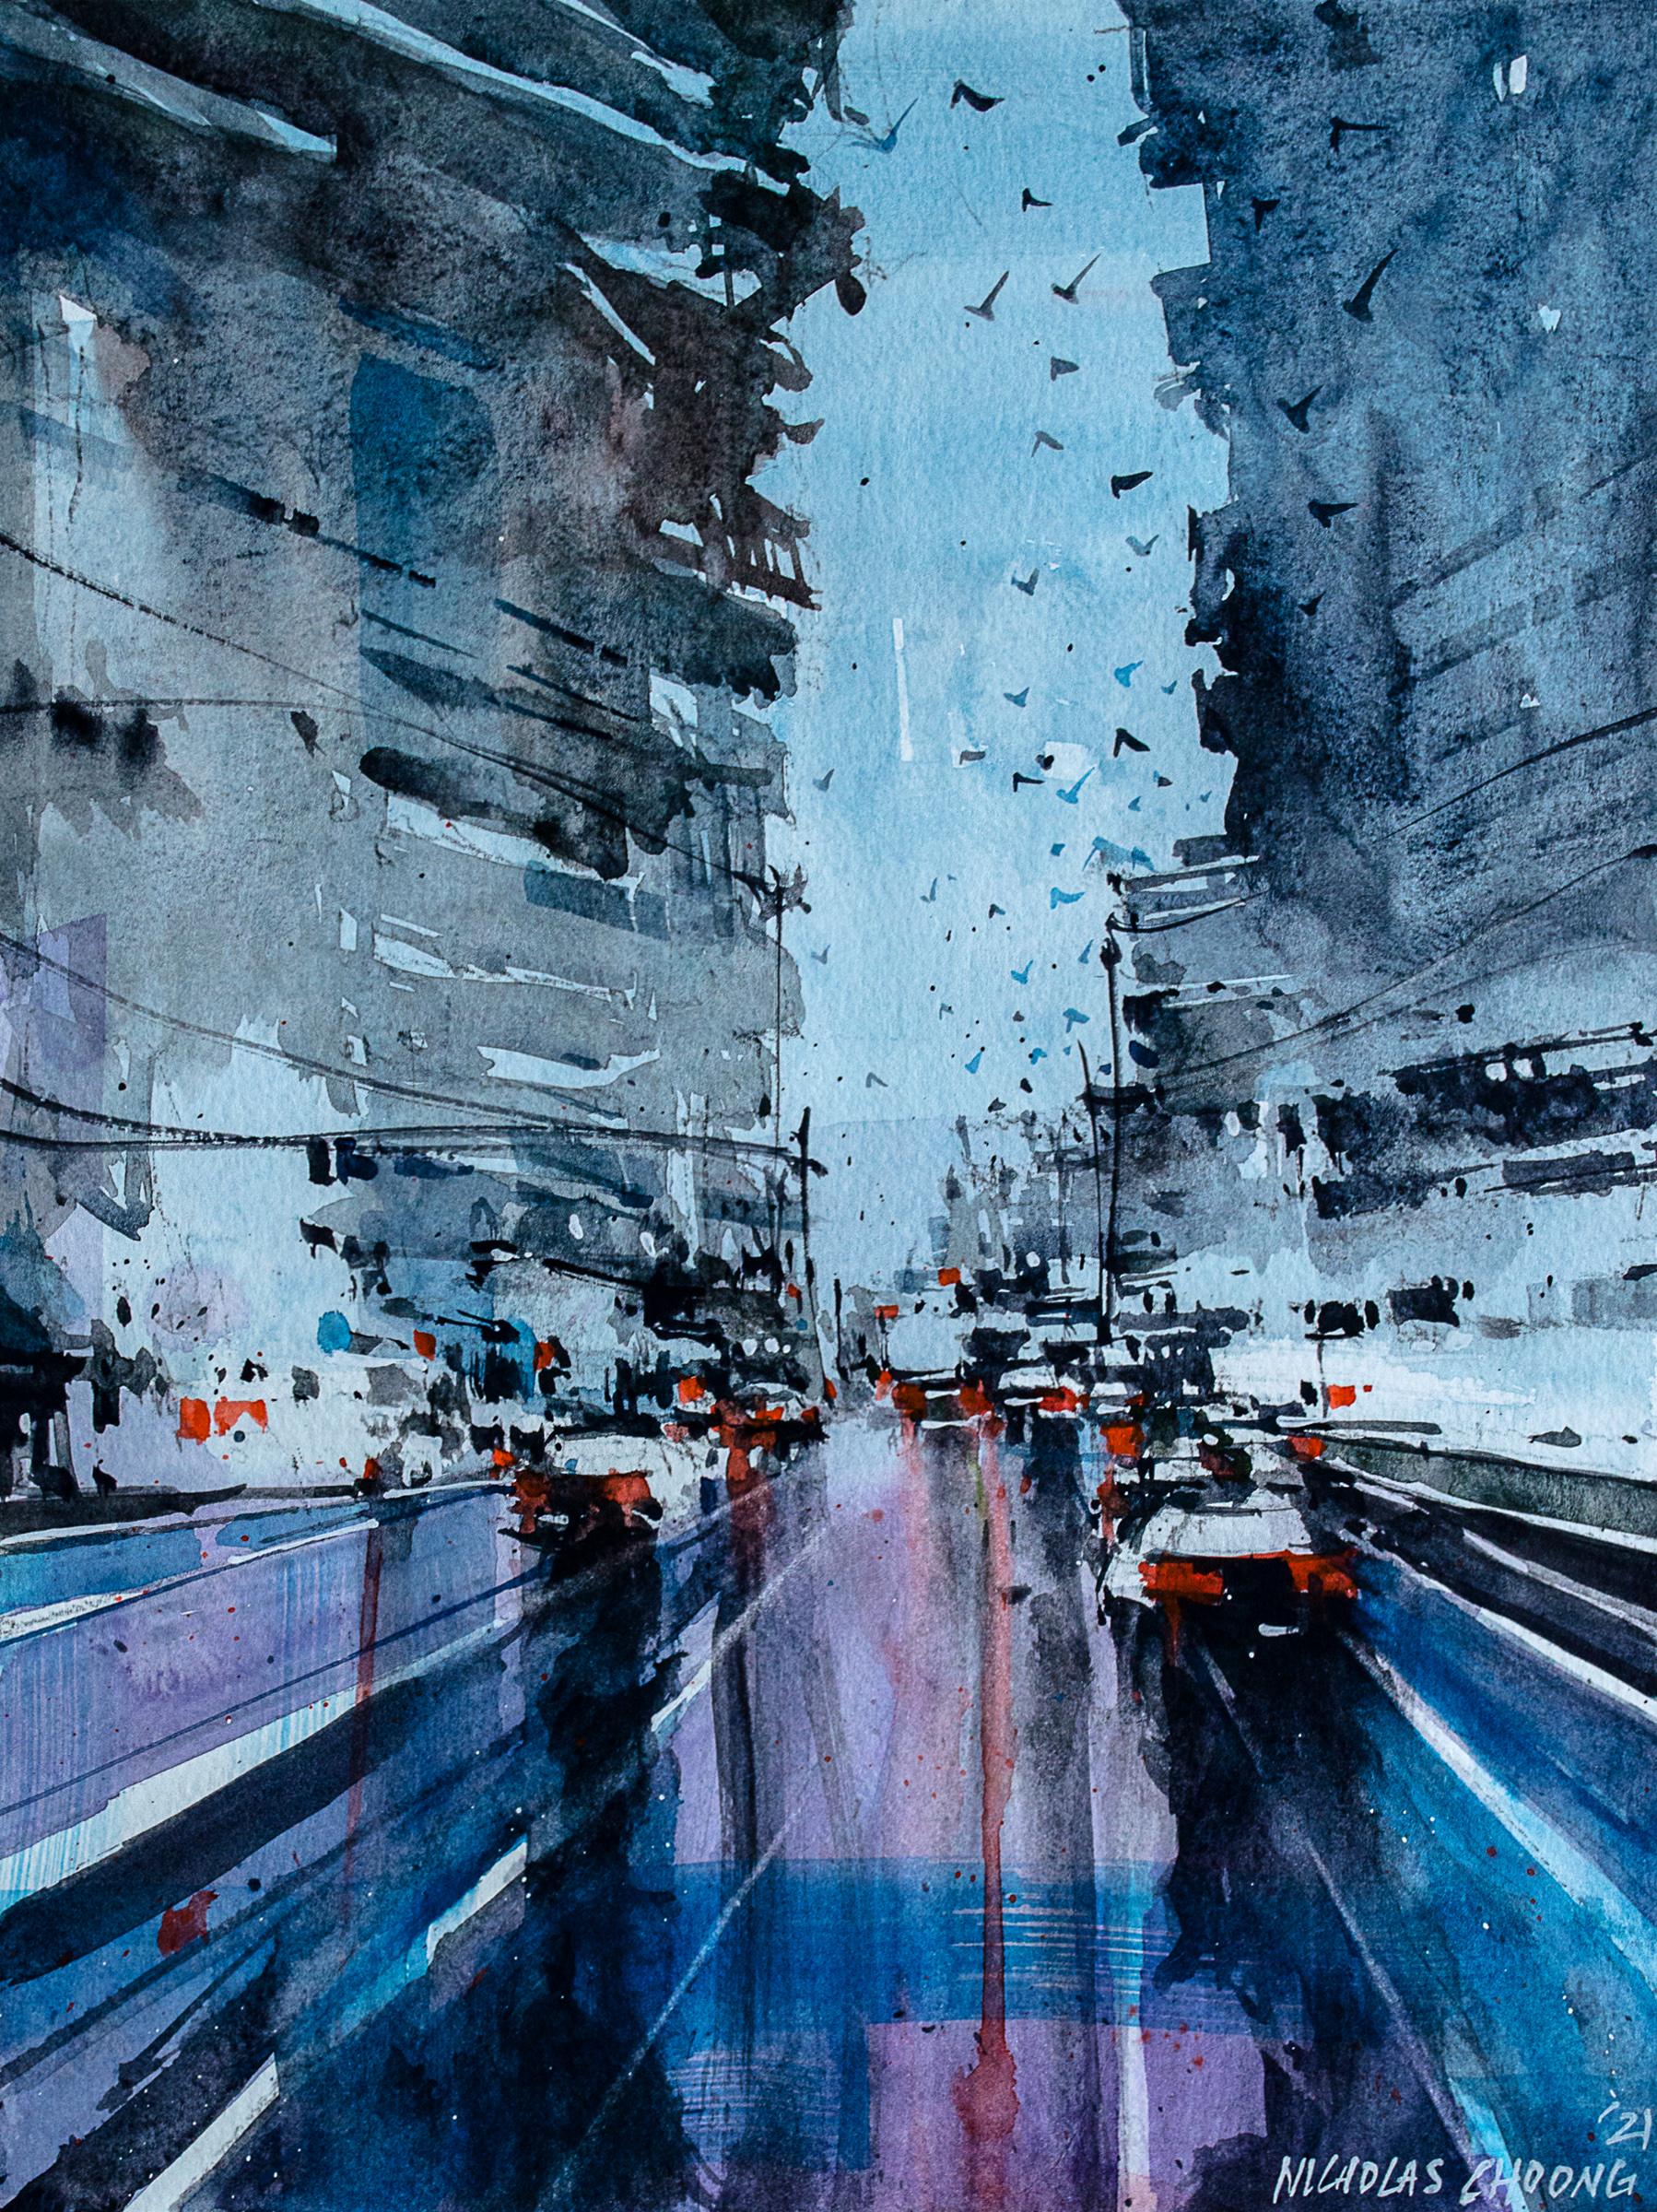 Nicholas Choong Landscape Painting - Composition #10, Reflection of Lights on the Streets in Abstract Expression 